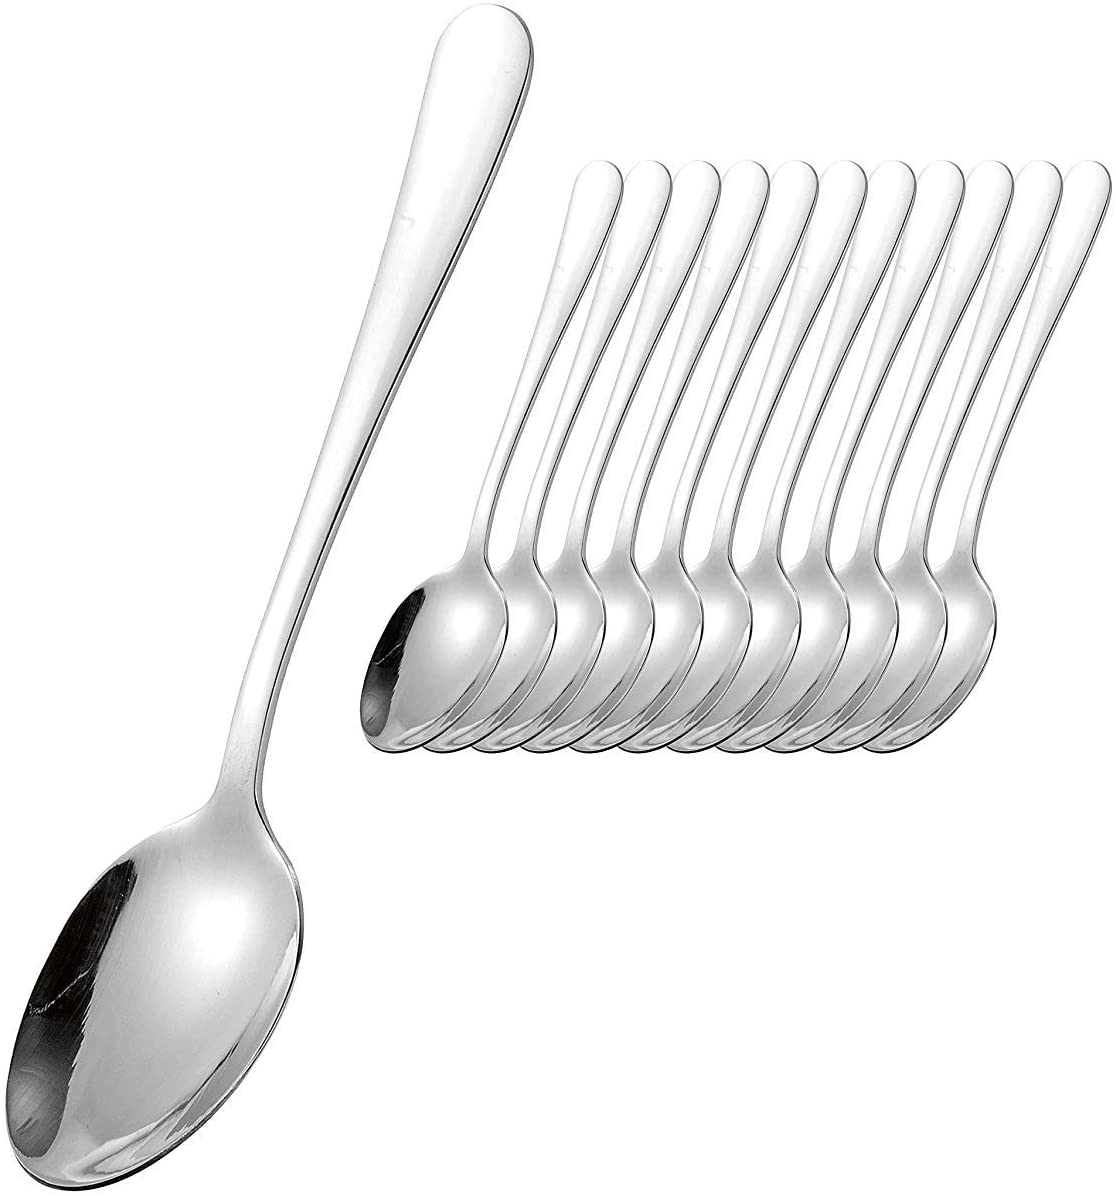 Esmeyer 156 - 120 12-piece coffee spoon set model Sylvia, 18 / 0 stainless steel, polished - the low-priced top seller for 25 years.